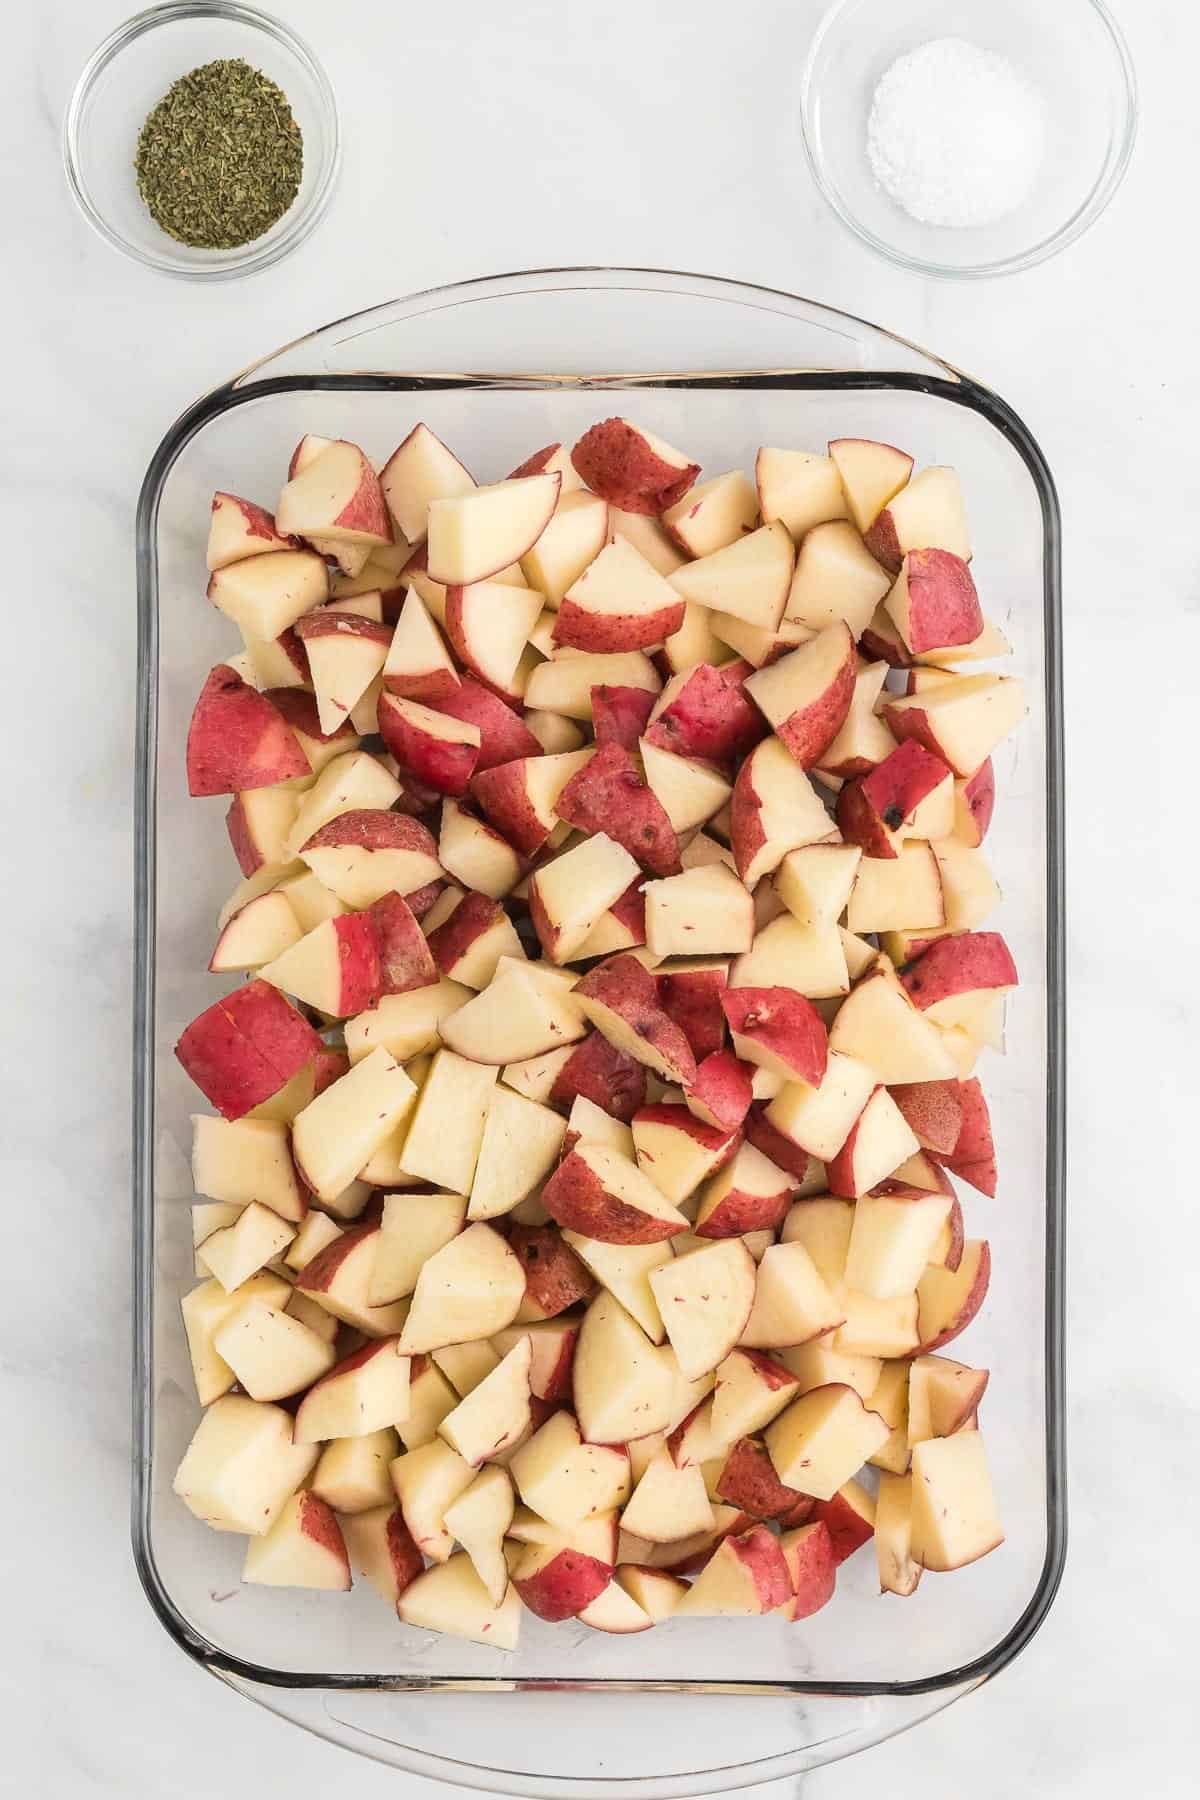 diced baby red potatoes in a baking dish